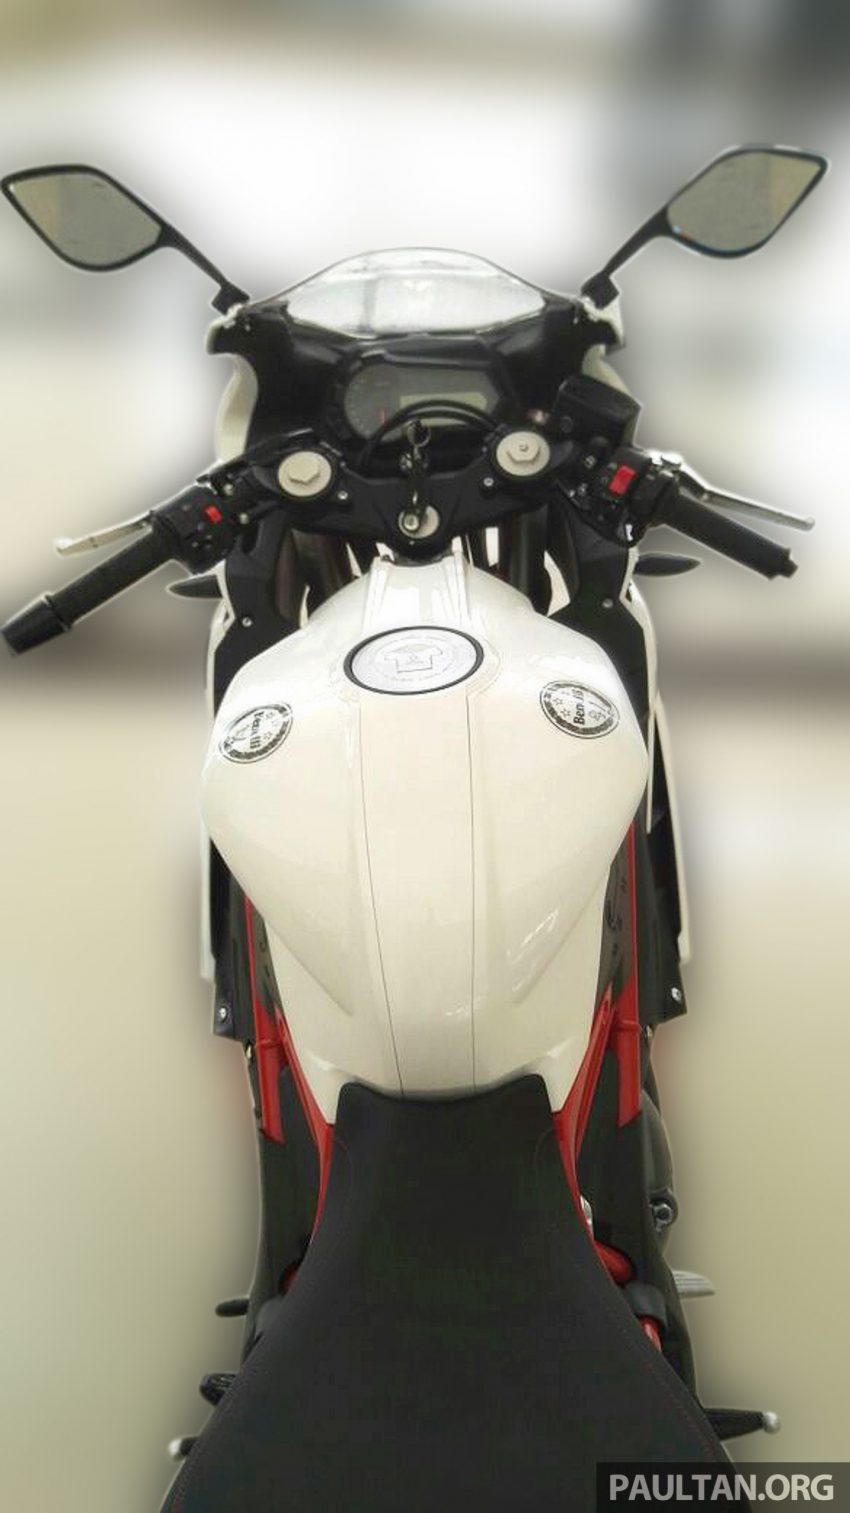 2016 Benelli T302R and TnT135 in Malaysia by Oct? 526190